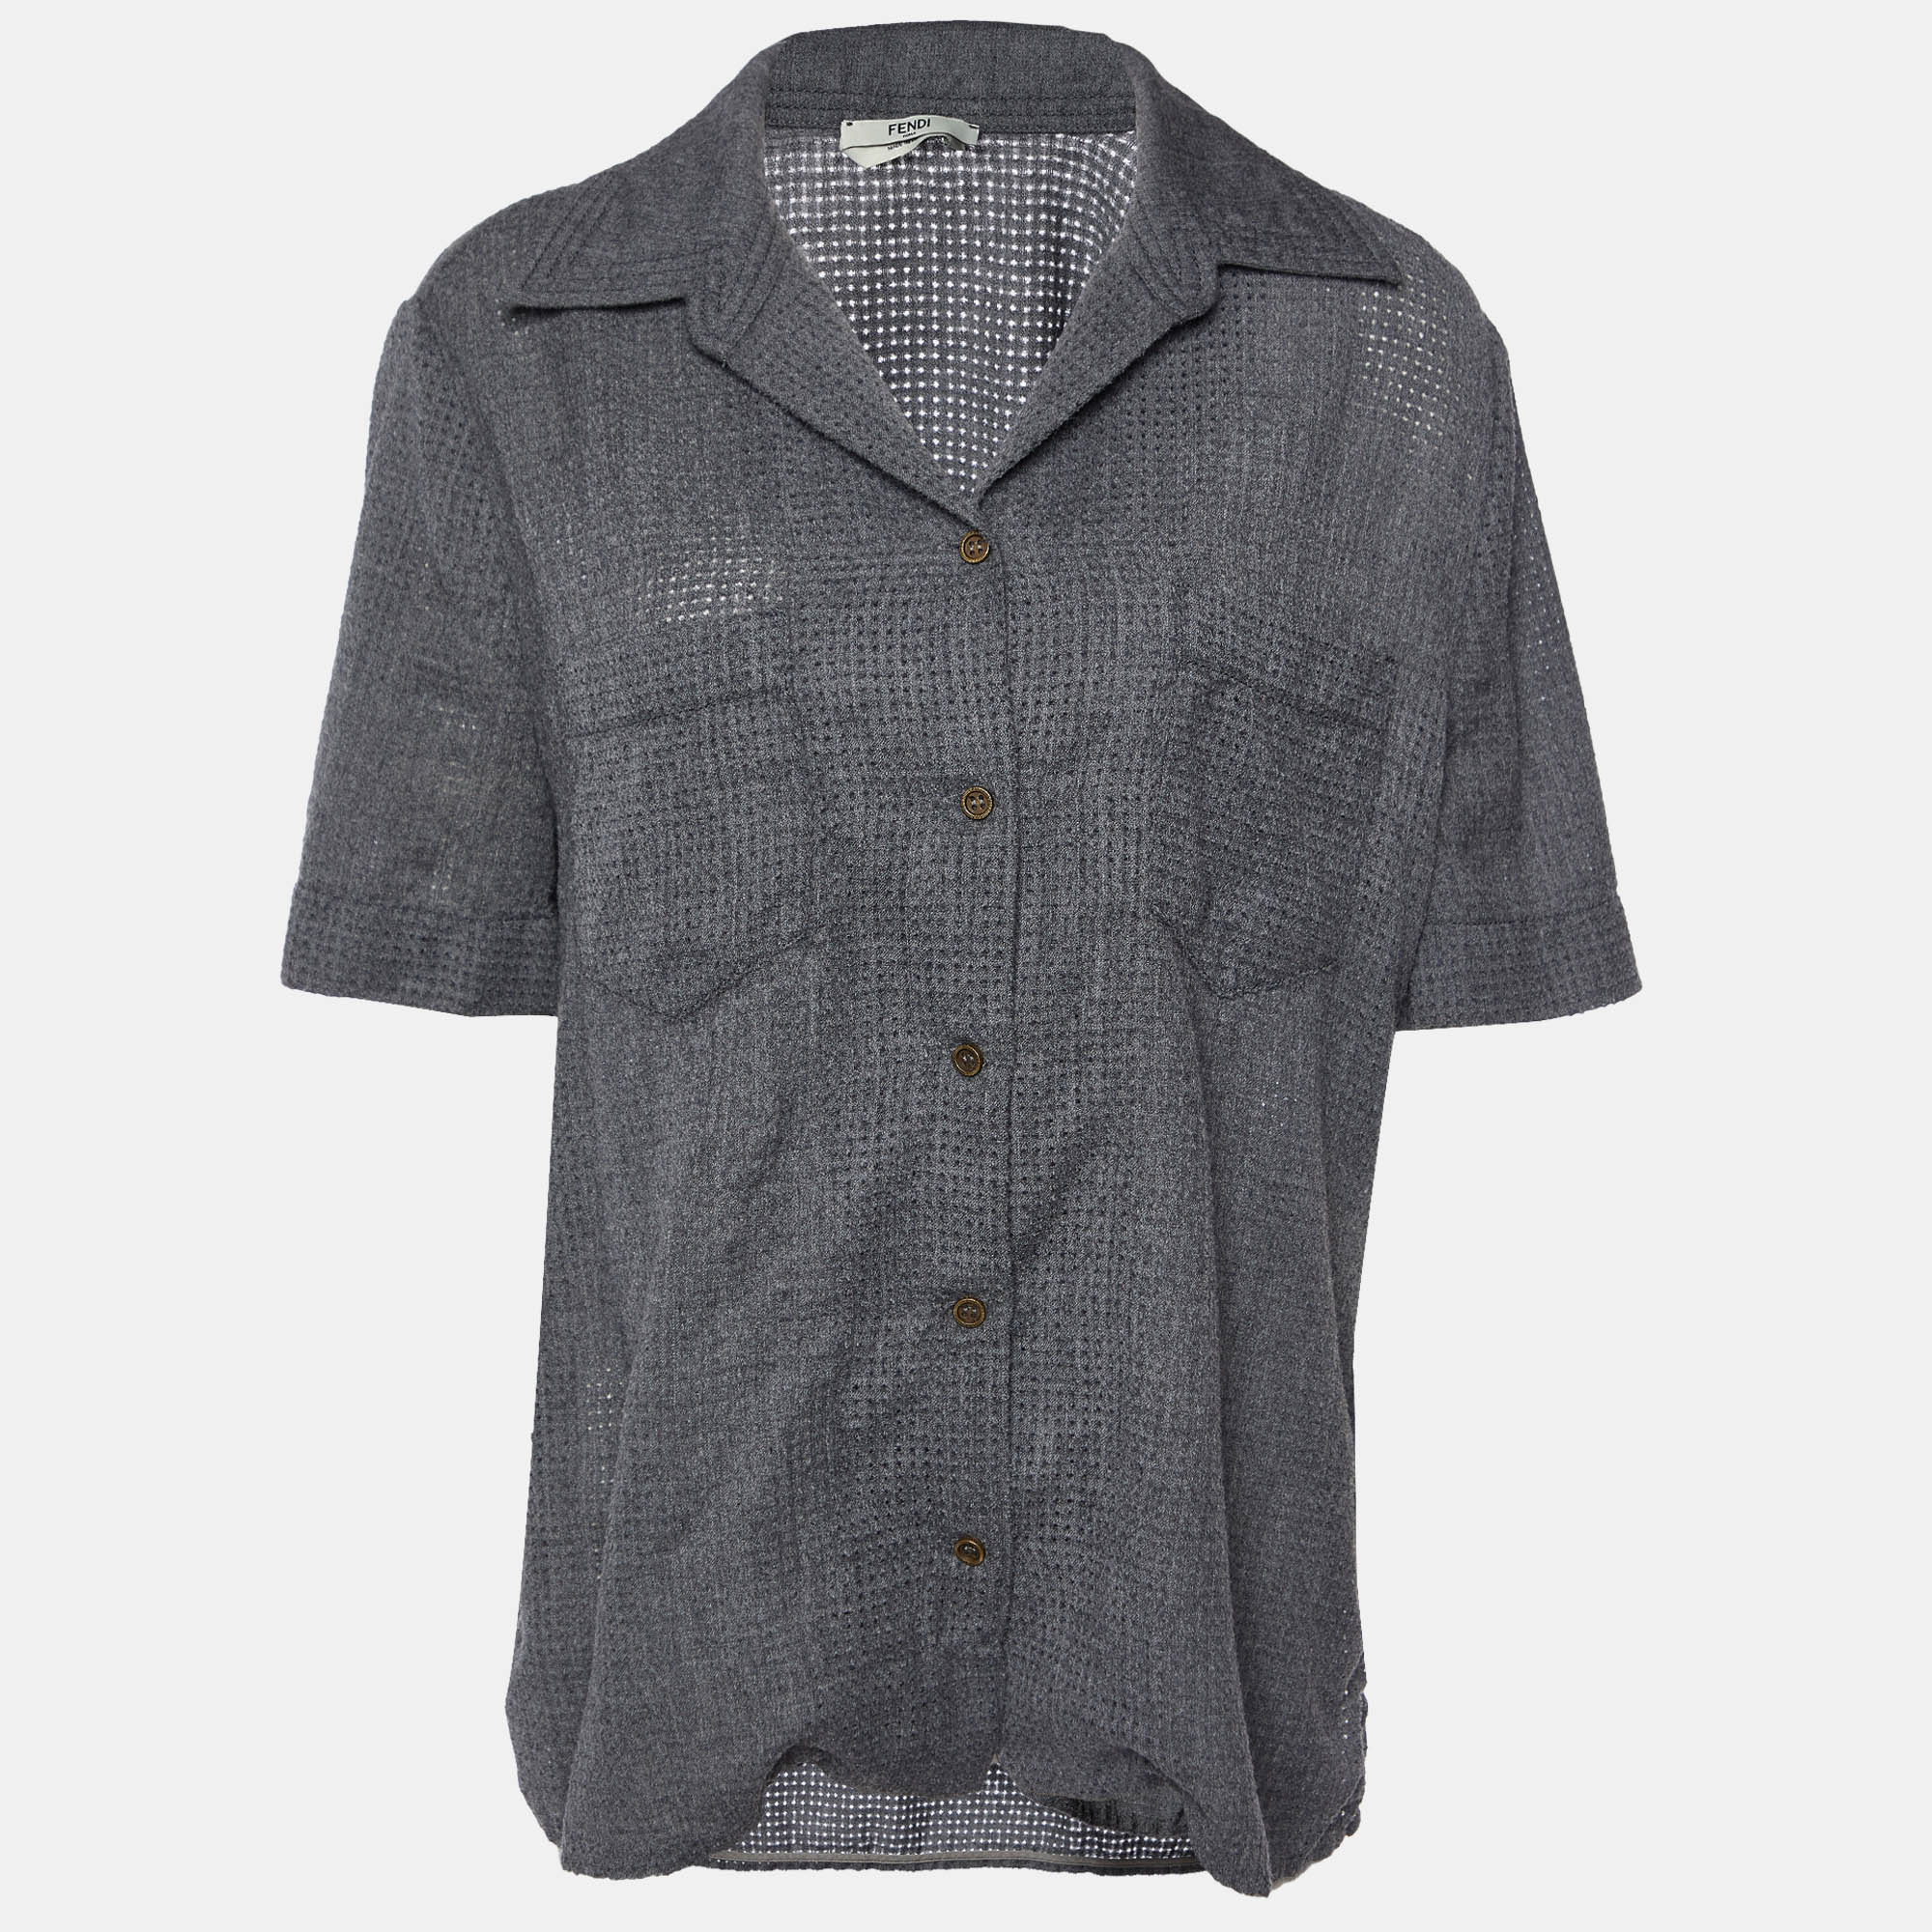 Pre-owned Fendi Grey Perforated Wool Short Sleeve Shirt M